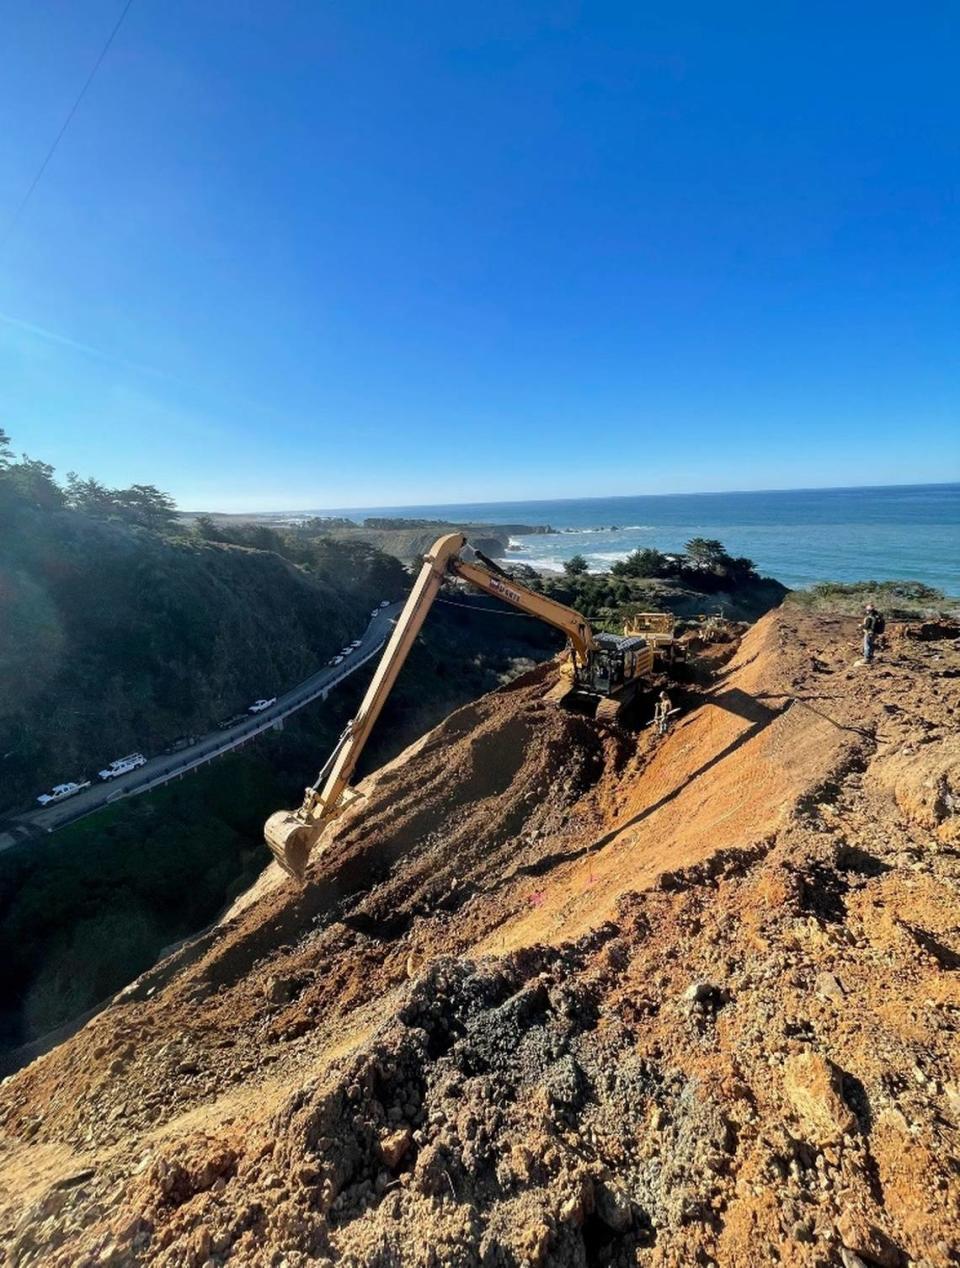 The Polar Star slide, located about a mile south of Ragged Point, is one of three major landslides blocking traffic on Highway 1.